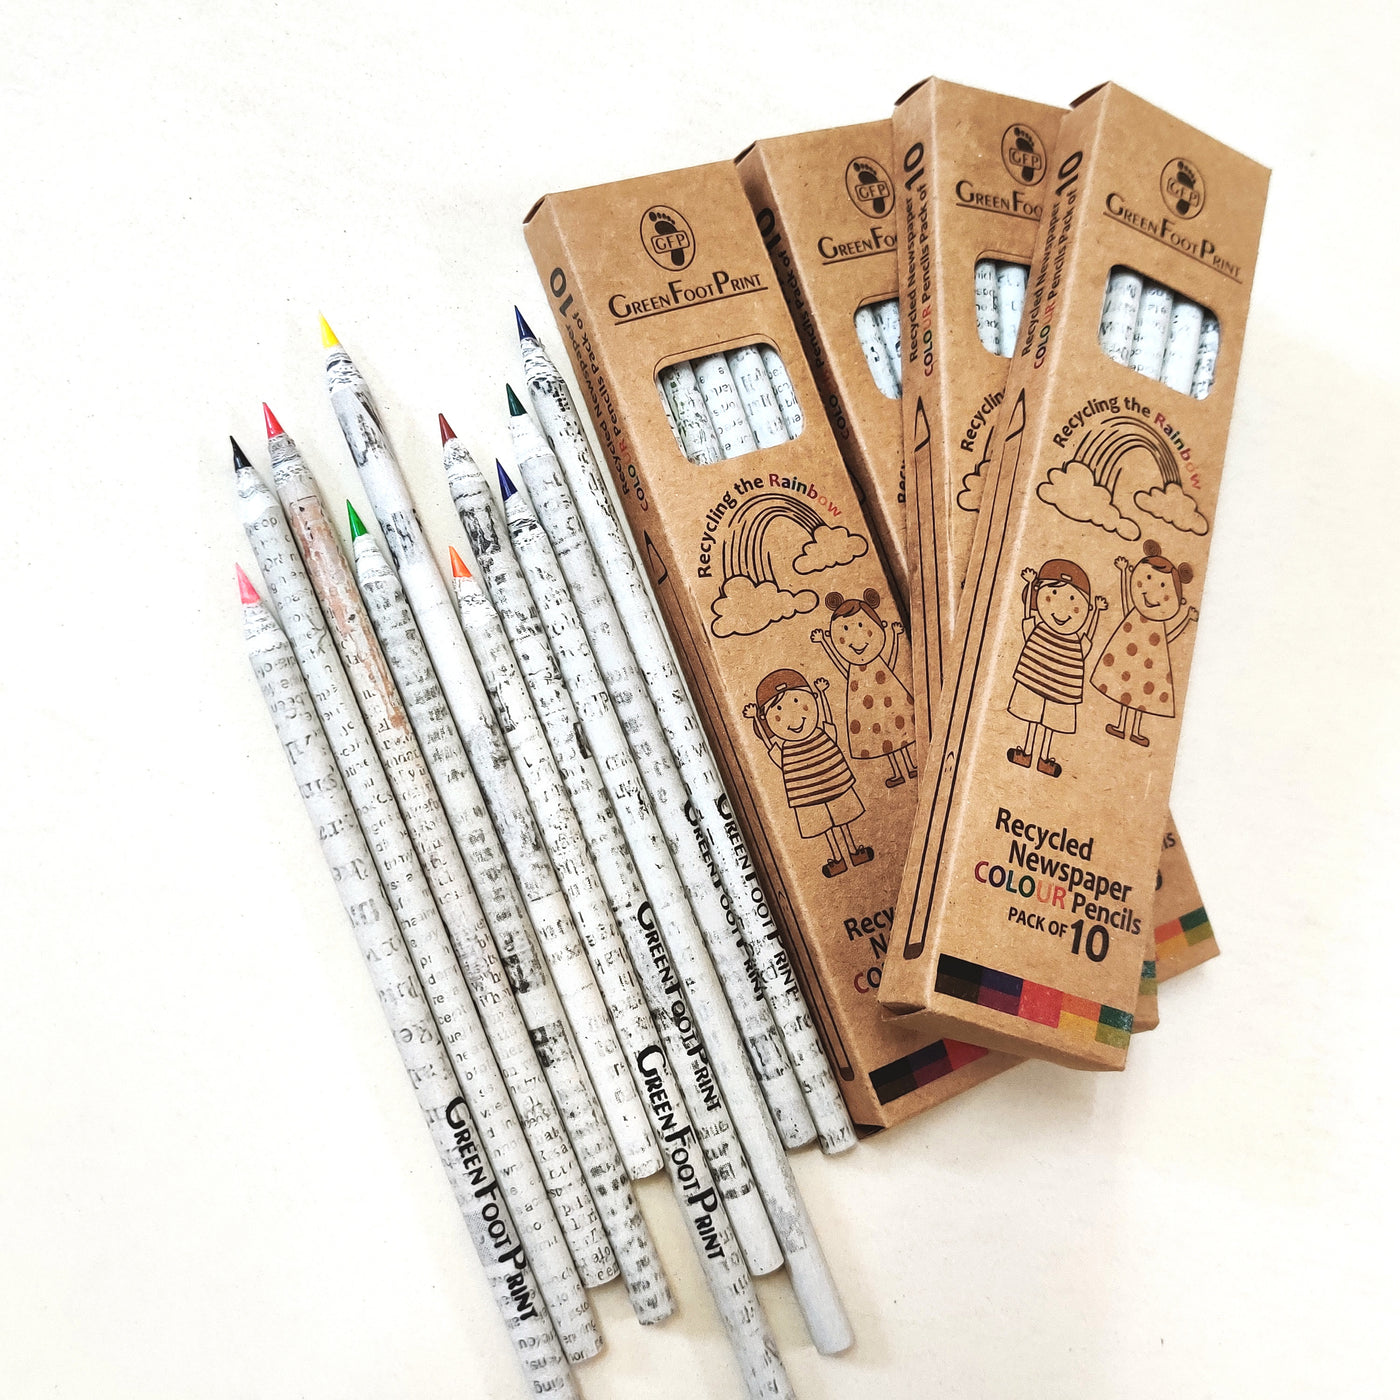 Recycled news paper colour pencils | set of 10 pencils x 2 packs